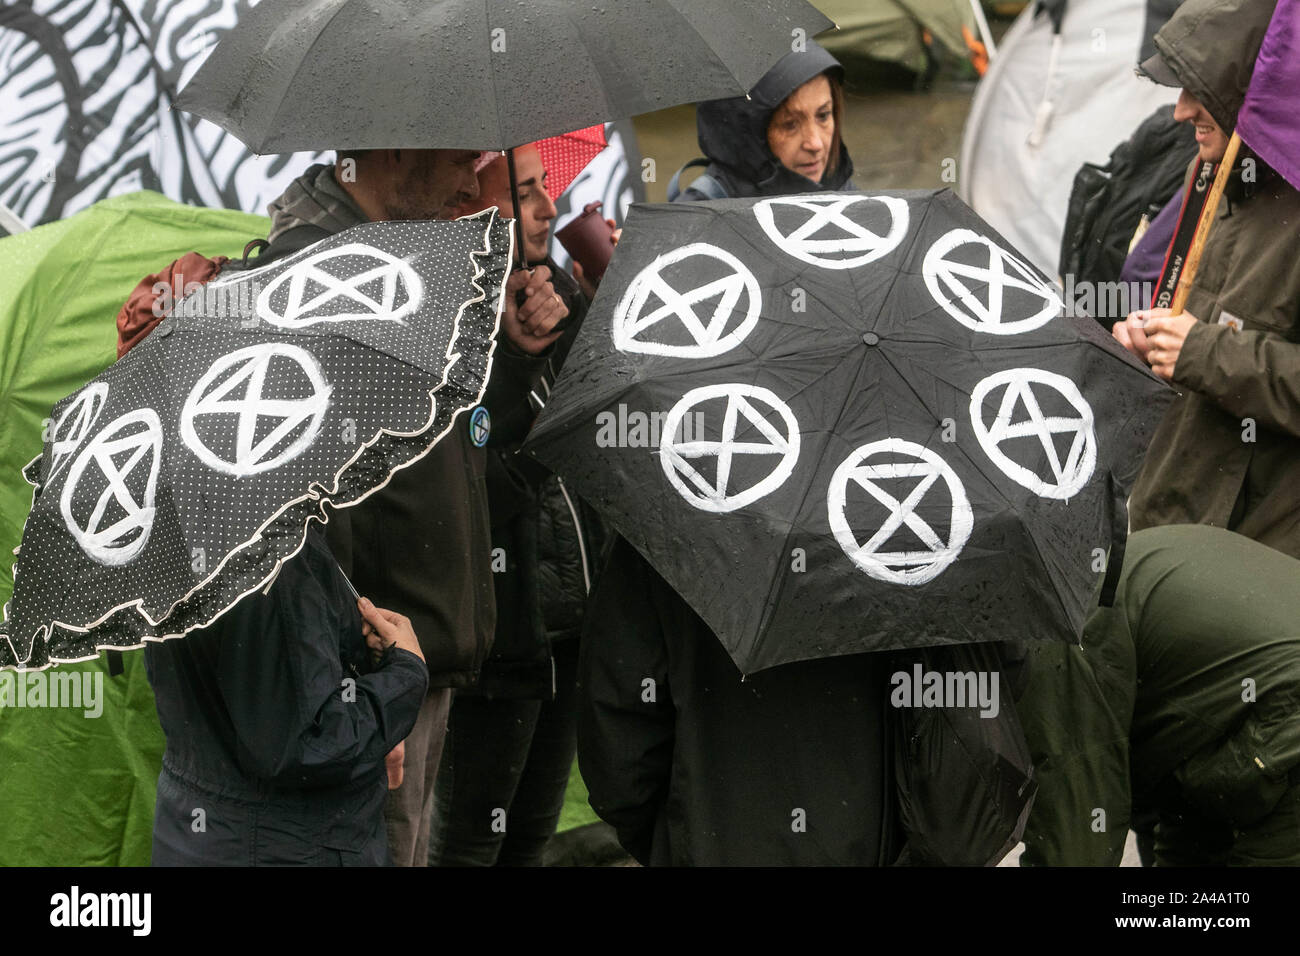 London, UK - 13 October 2019. Climate activists shelter under umbrellas with the Extinction rebellion symbol as they continue their protest for a seventh day while camping  out in Trafalgar Square in an attempt to force the government to declare a climate emergency and meet their demands to reduce to zero carbon emmissions by 2025. Credit: amer ghazzal/Alamy Live News Stock Photo